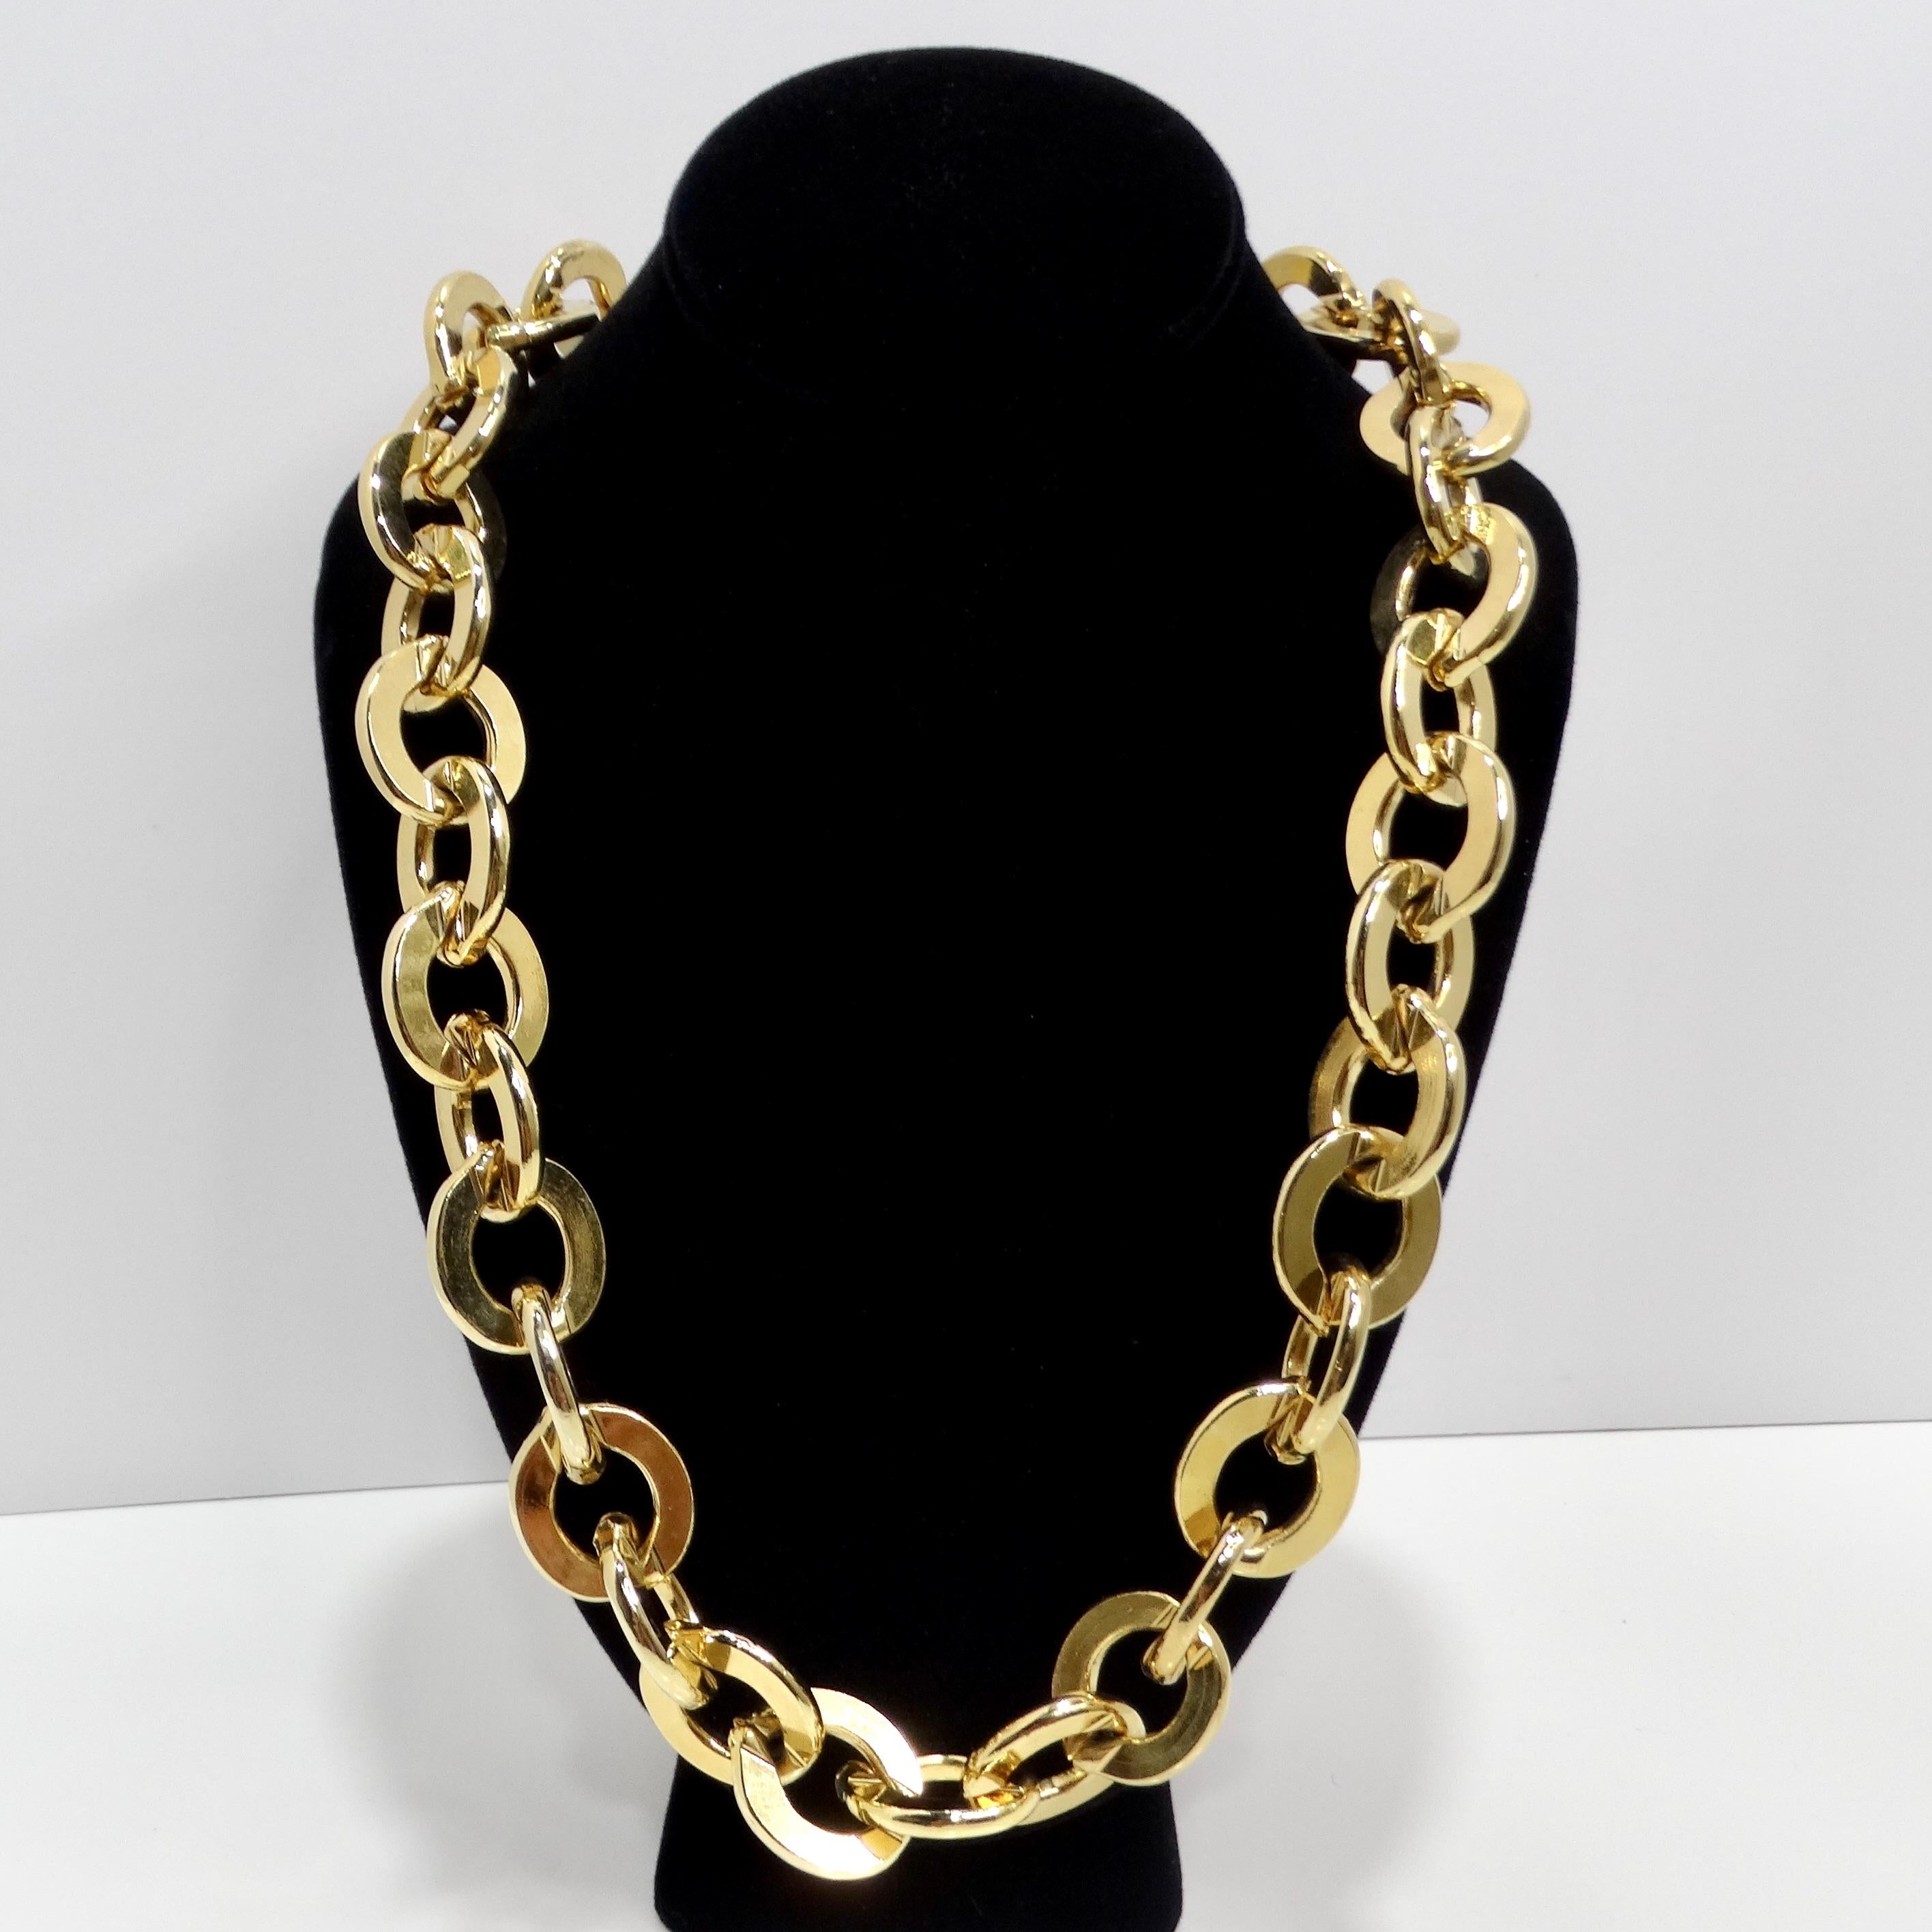 Introducing the Erwin Pearl 1980s Gold Tone Chain Necklace, a timeless piece that combines classic elegance with a bold and contemporary twist. Crafted with precision and attention to detail, this yellow gold-plated chain necklace exudes